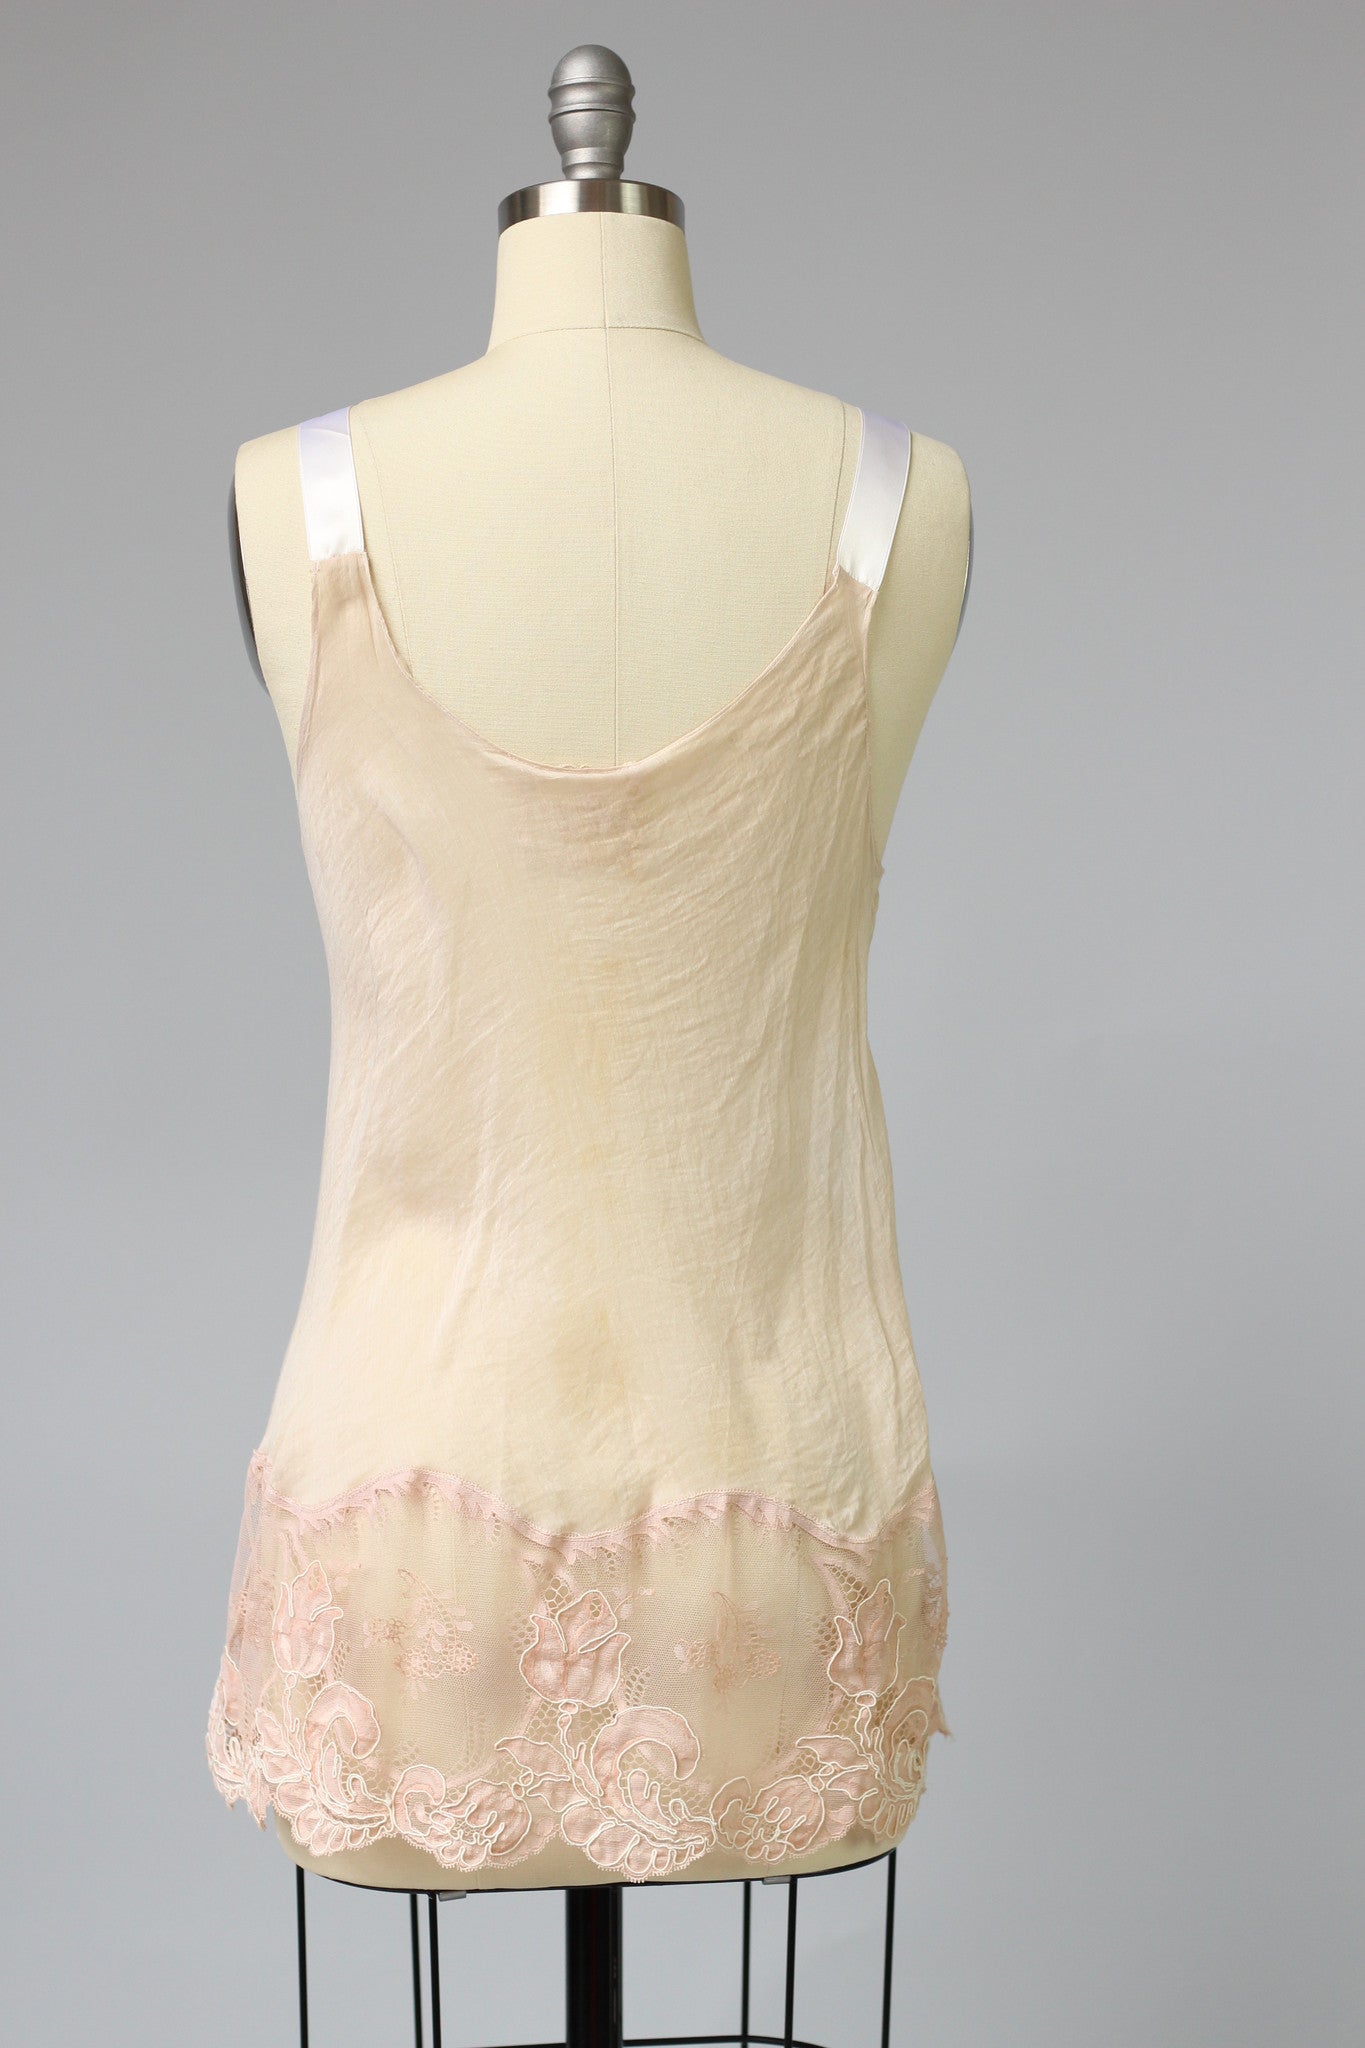 Silk Layering Tank with Antique Chantilly Lace by Bonnie Strauss